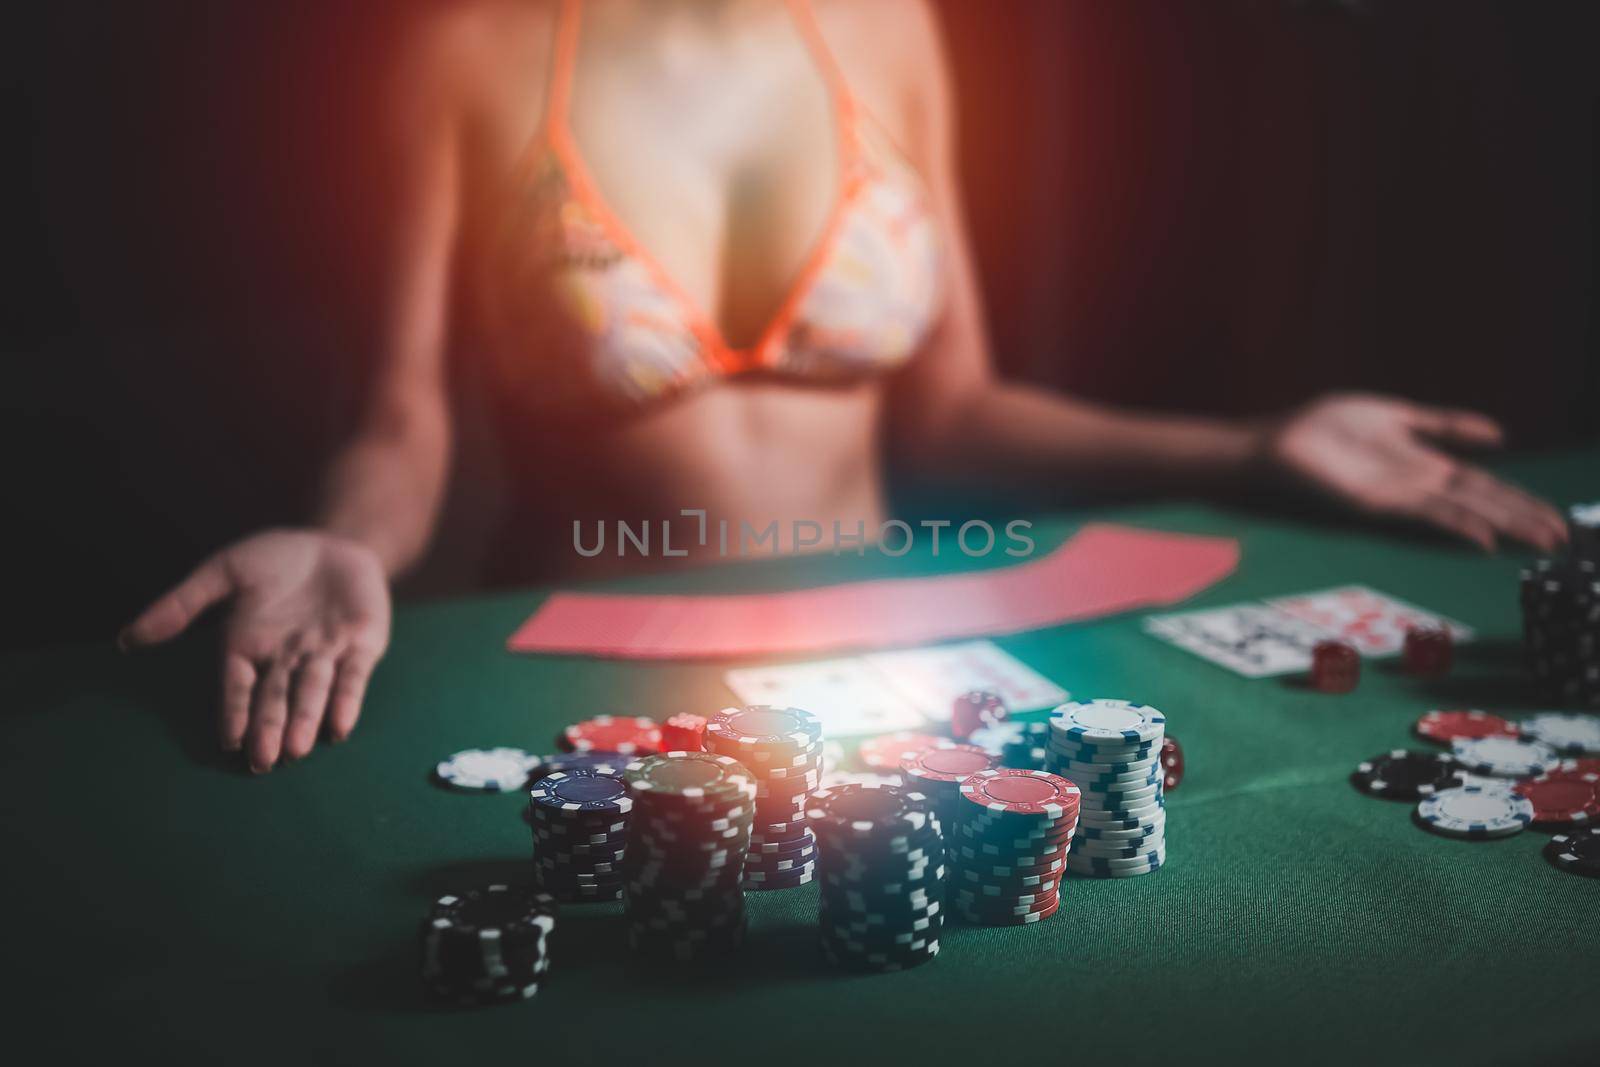 Woman wearing bikini dealer or croupier shuffles poker cards in a casino on the background of a table,asain woman holding two playing cards. Casino, poker, poker game concept by Wmpix